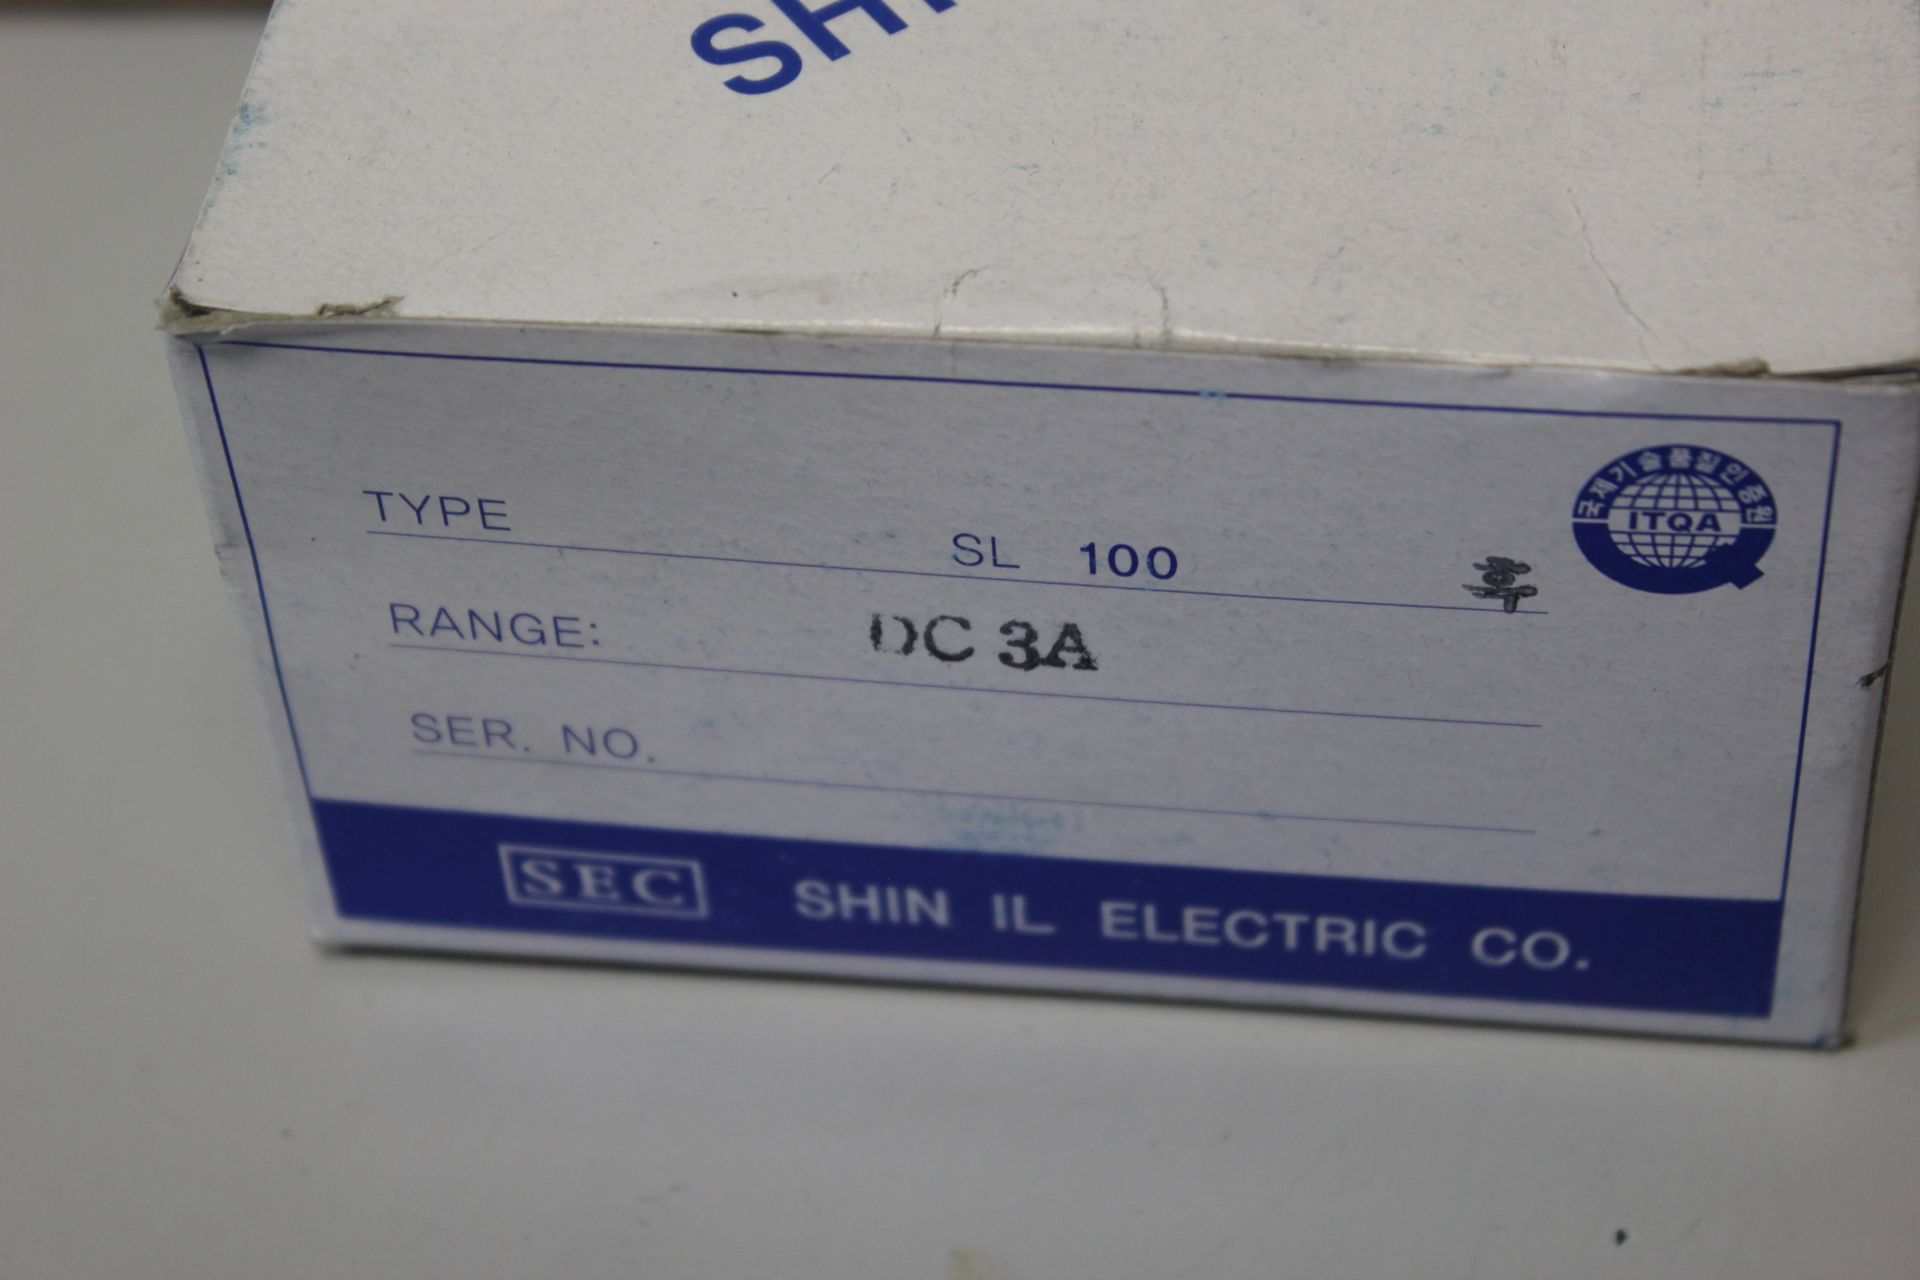 NEW SEC SHIN IL ELECTRIC AMPERES METER - Image 2 of 4